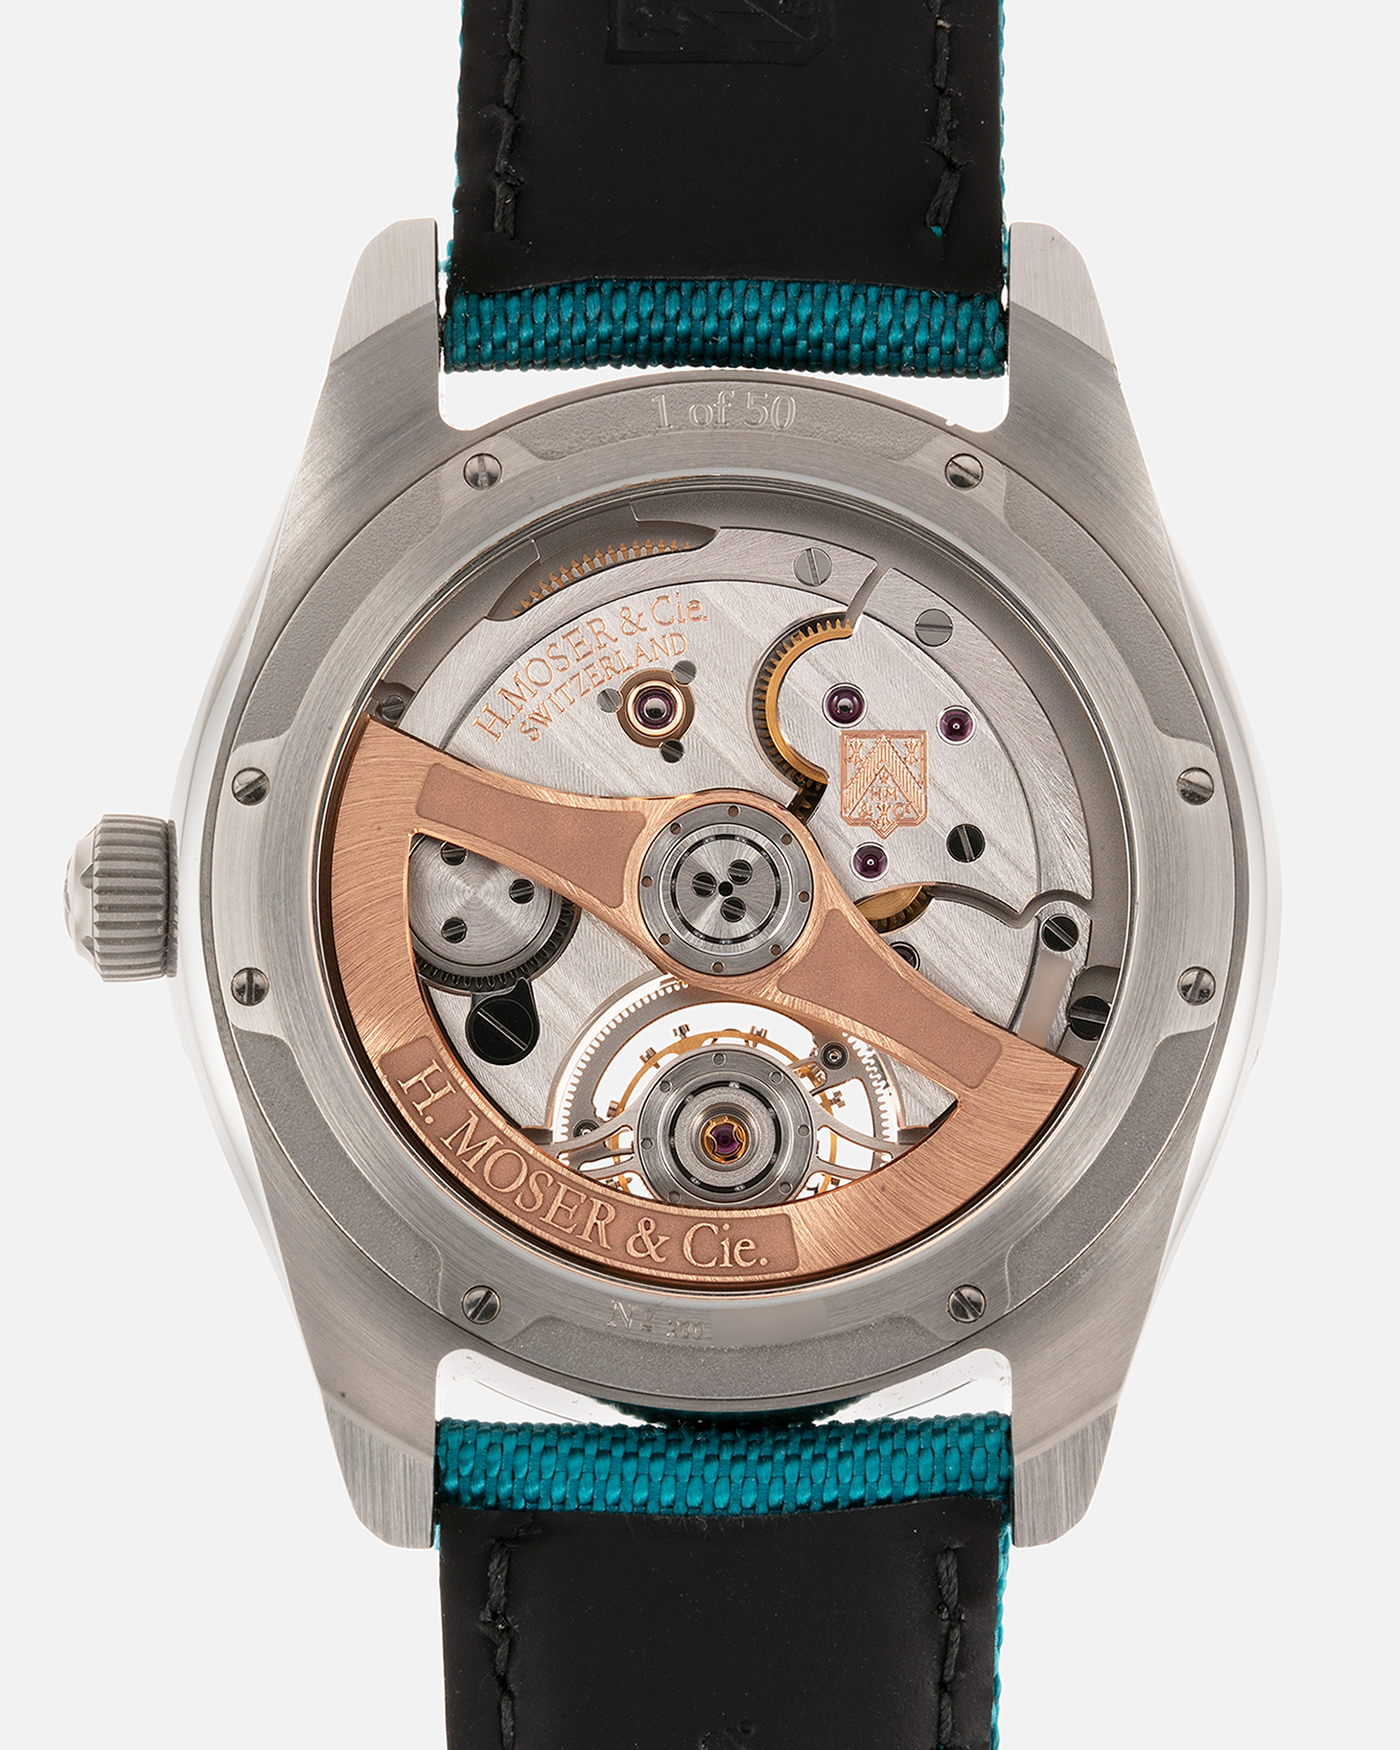 Brand: H.Moser & Cie Year: 2022 Model: Pioneer Tourbillon Material: Stainless Steel Movement: Cal. HMC 804 Case Diameter: 42.8mm Bracelet/Strap: H. Moser & Cie Blue Textile Strap with Stainless Steel Tang Buckle